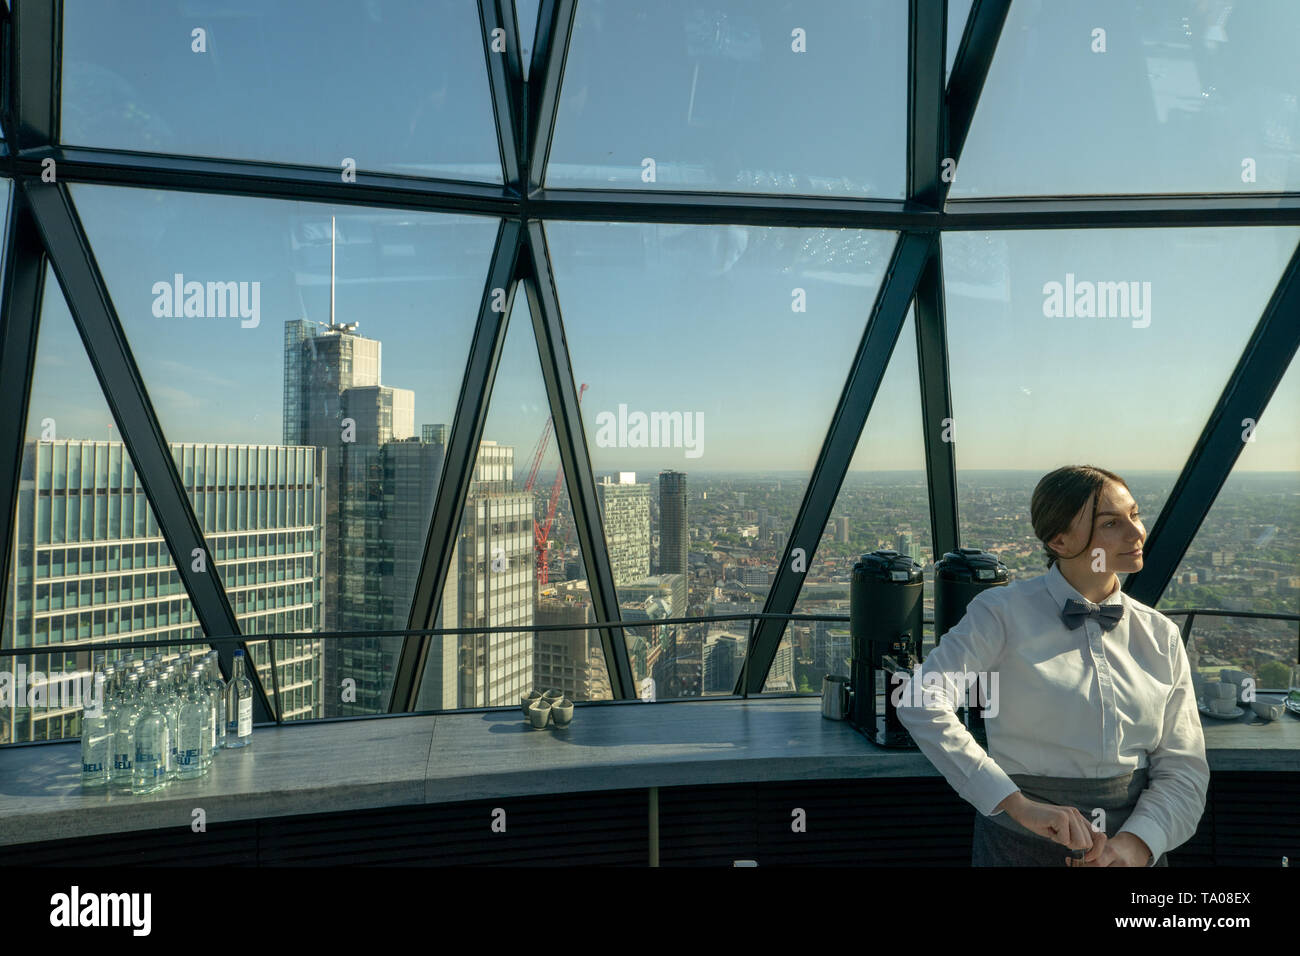 A waitress at Searcys on the top floor of the Gherkin building in London. Photo date: Tuesday, May 21, 2019. Photo: Roger Garfield/Alamy Stock Photo